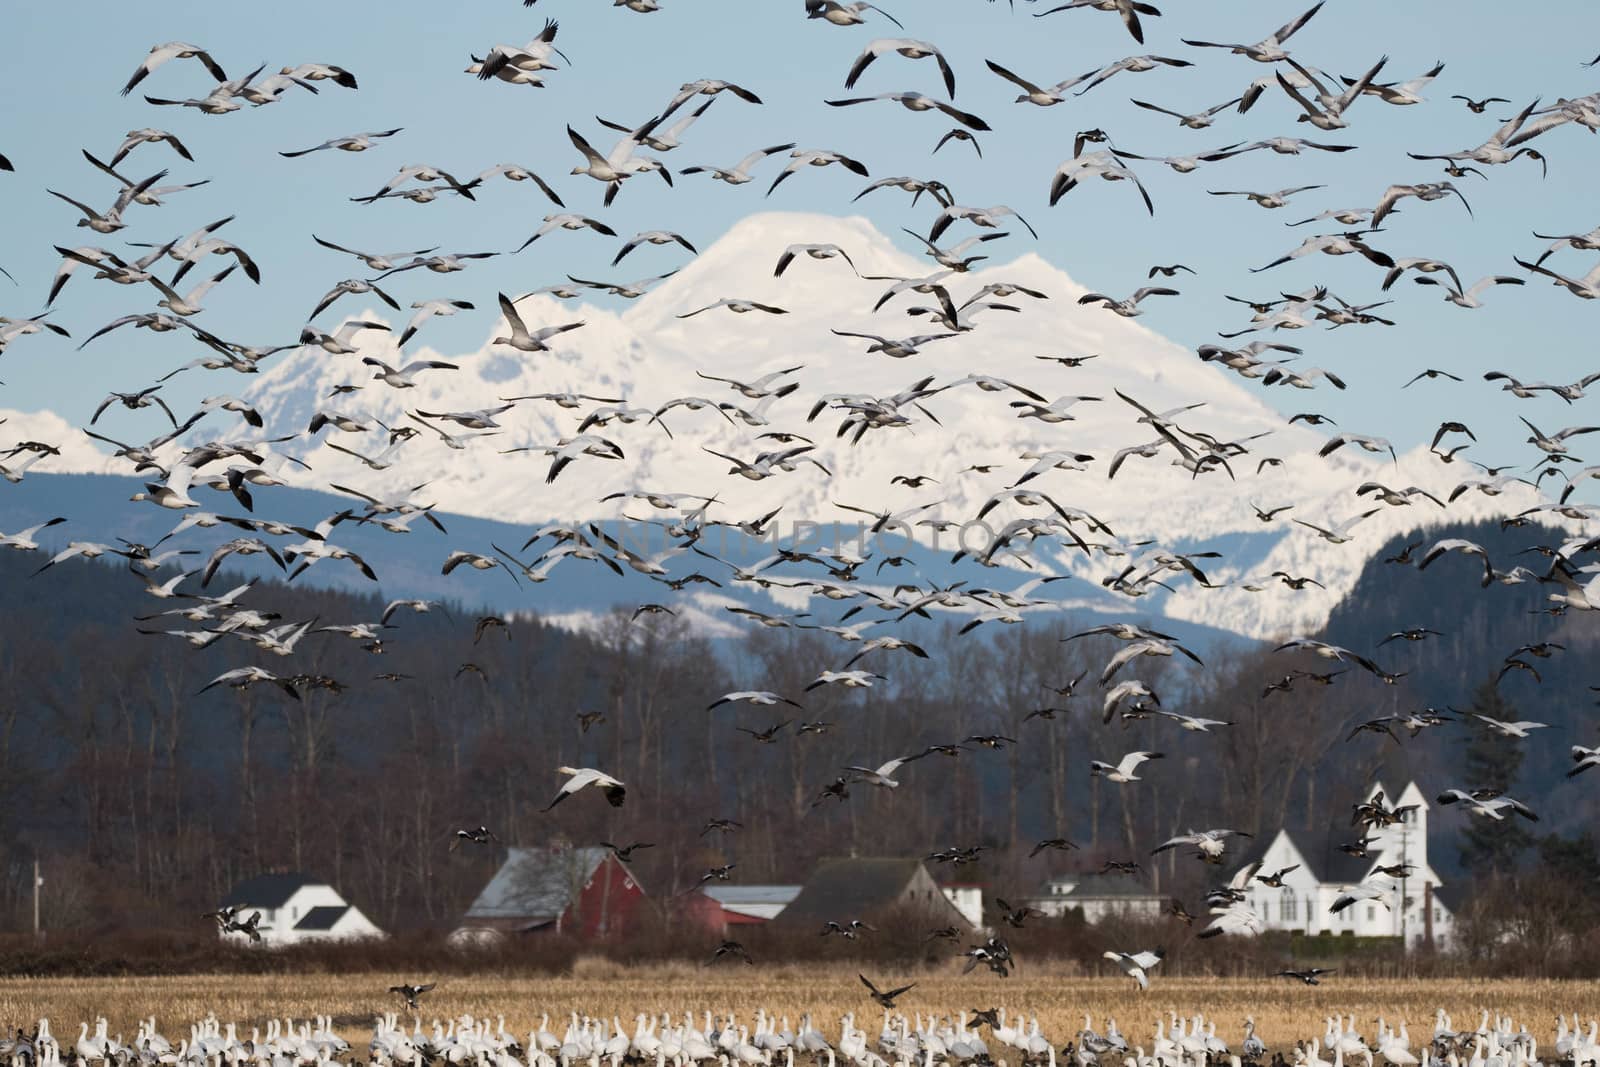 Snow Geese flying over Skagit Valley, WA with Mount Baker and church in the background.